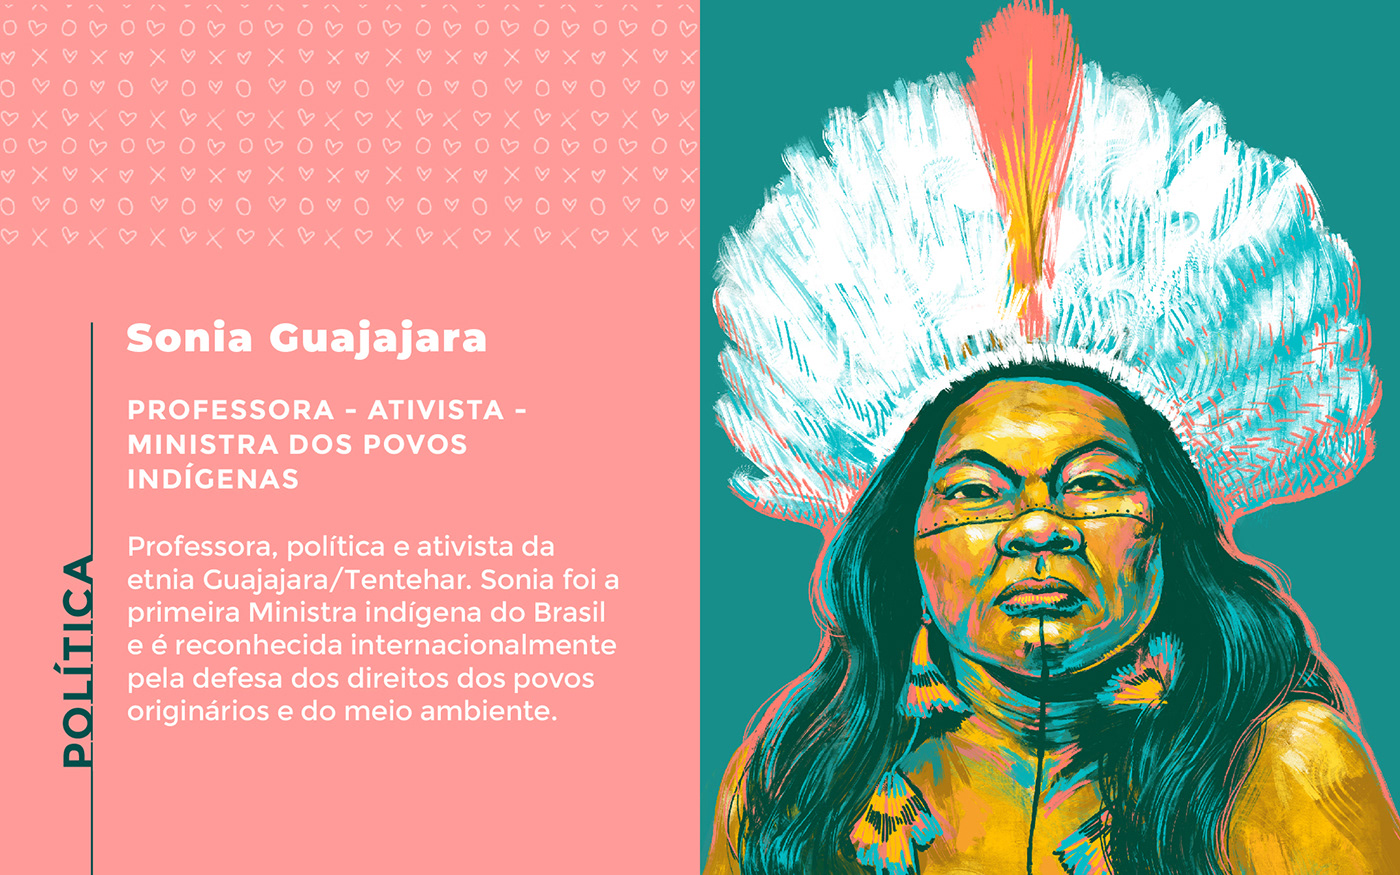 An illustrated portrait of  Sonia Guajajara the first indigenous people minister in Brazil.
